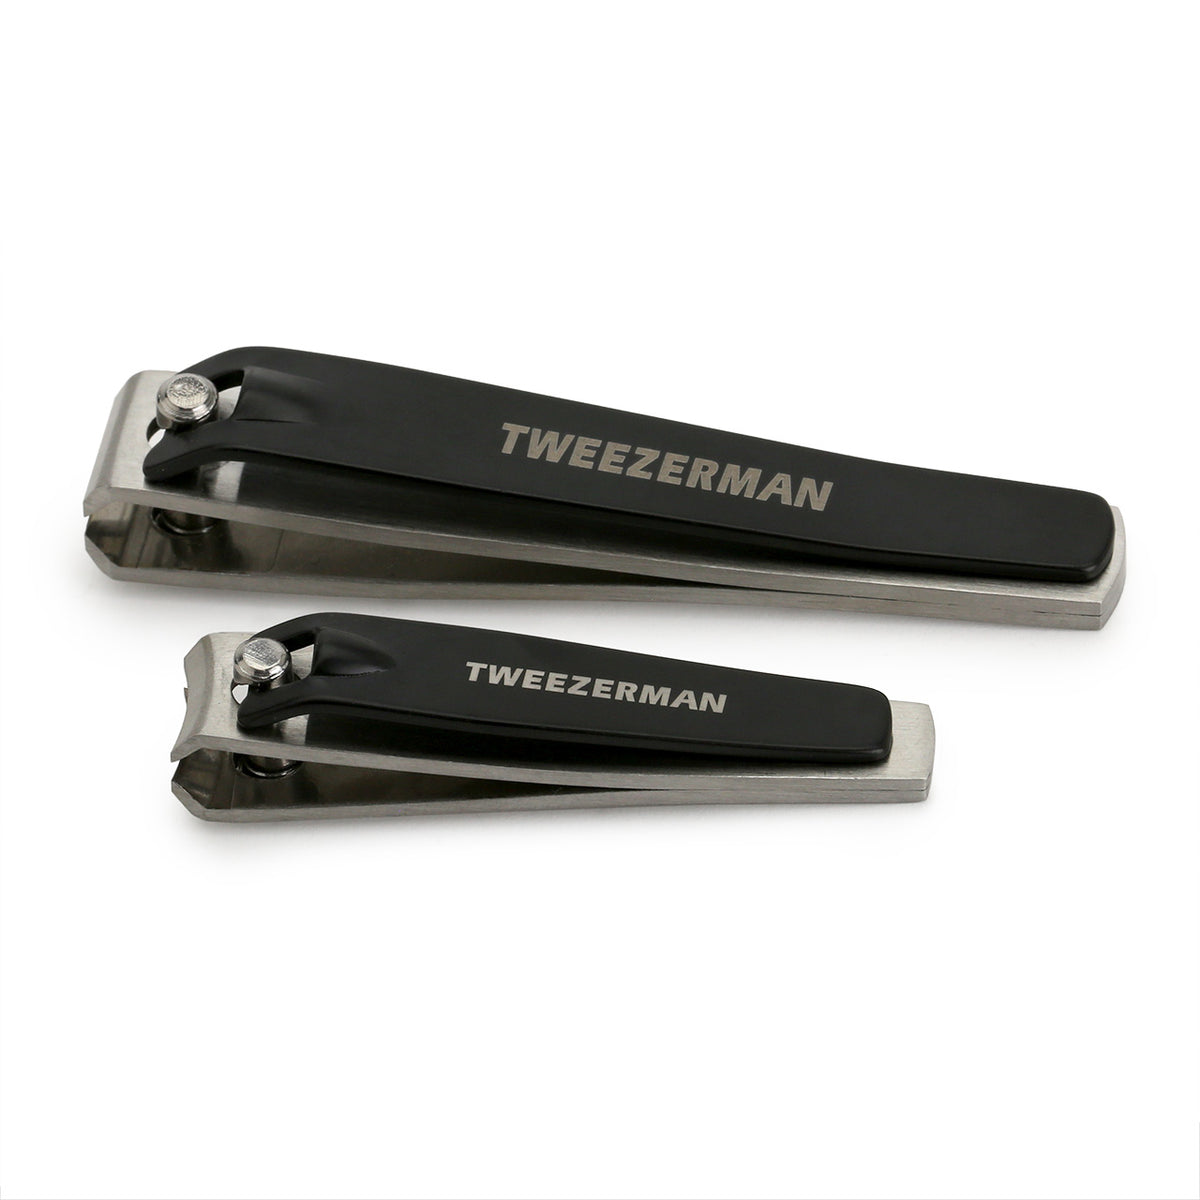 Tweezerman fingernail and toenail clippers are stainless steel with black levers. Pictured here in the closed position